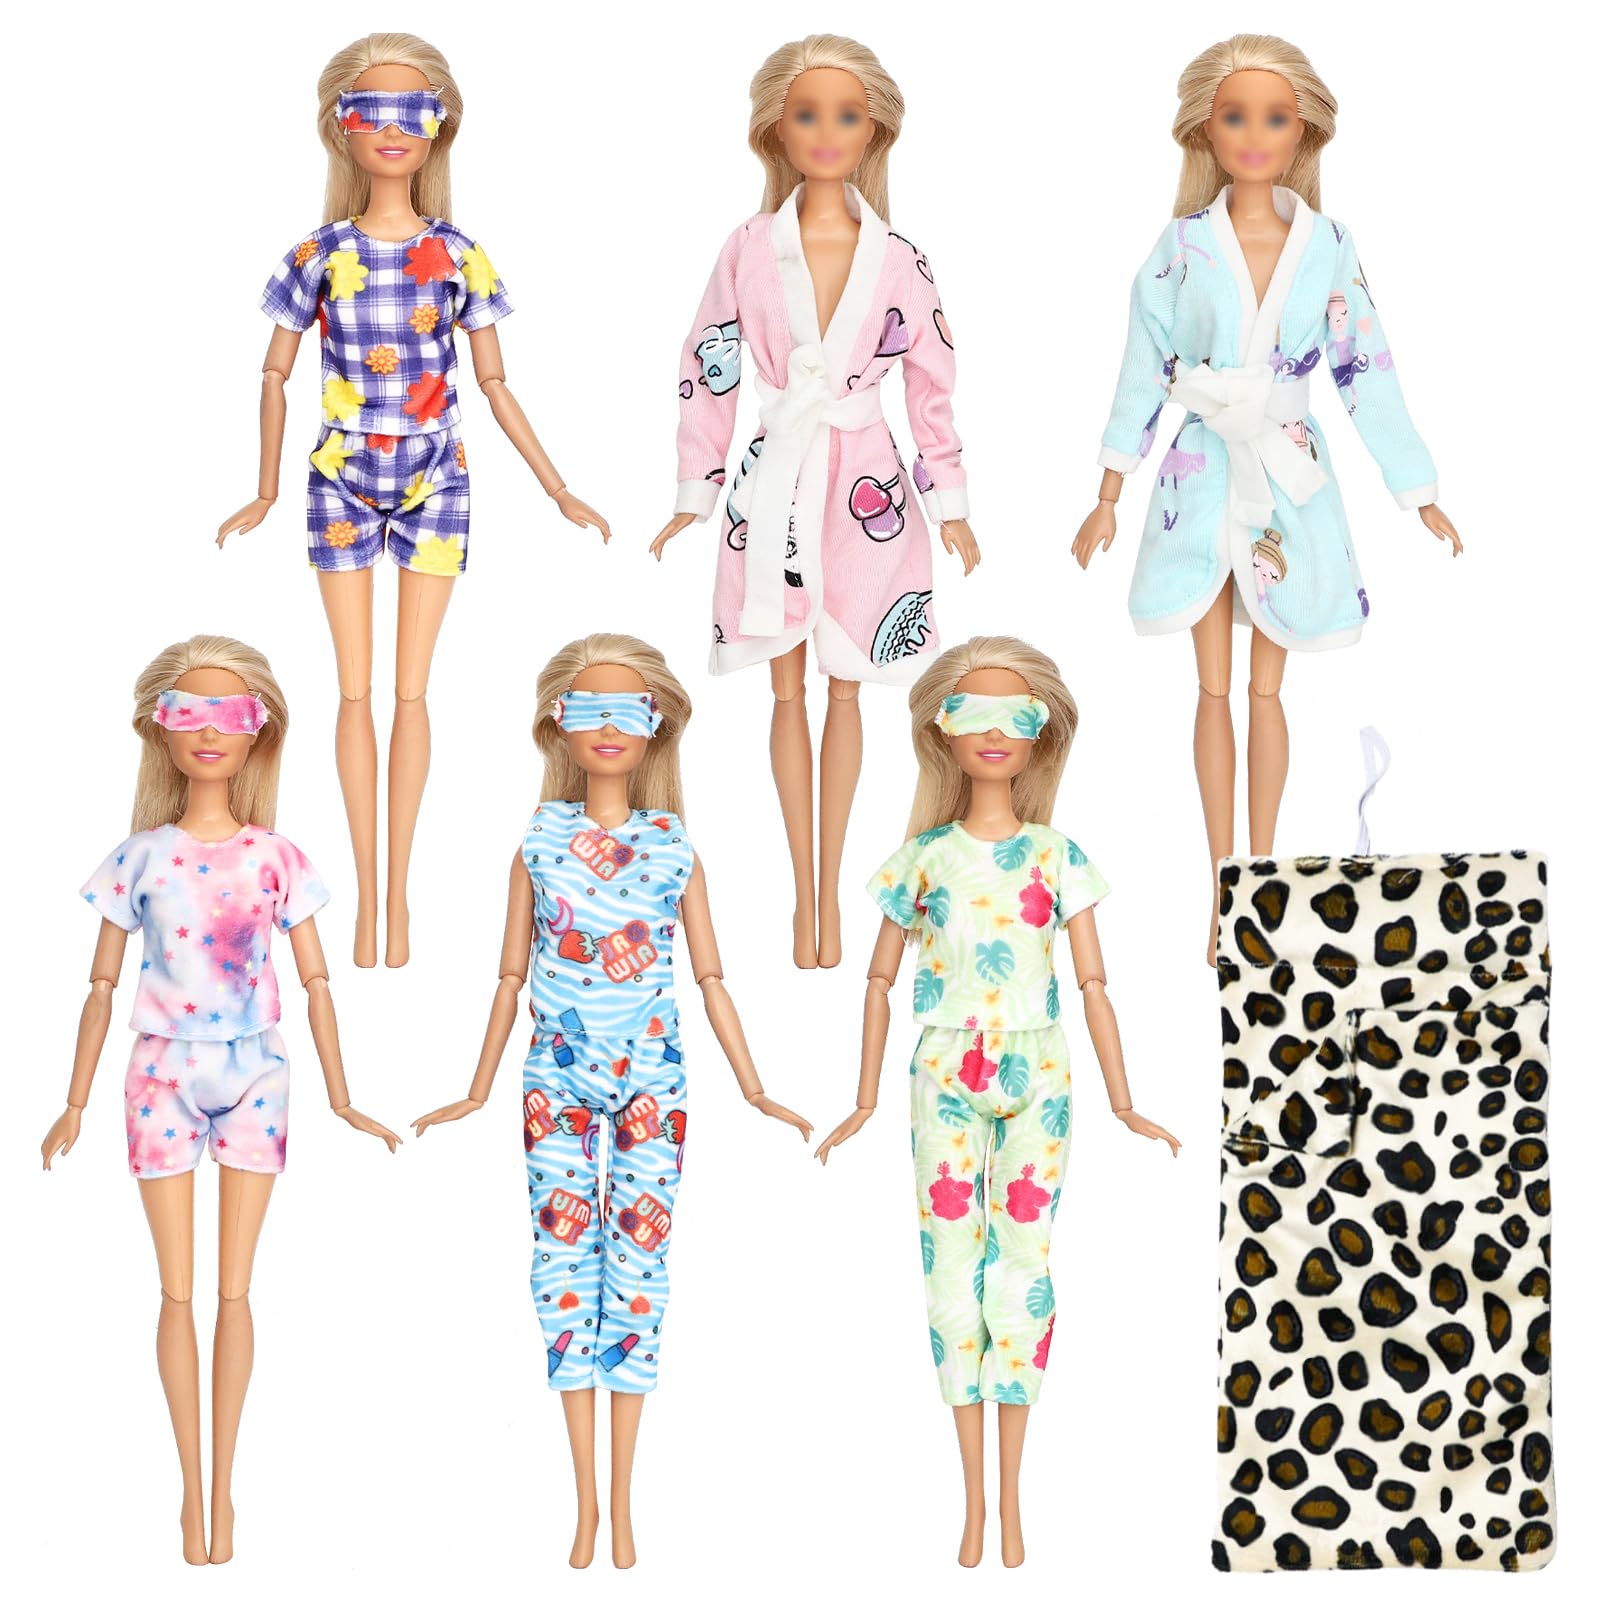 SOTOGO 11 Pieces Doll Clothes and Accessories for 11.5 Inch Girl Doll Good Sleeping Playset Include 6 Sets Doll Pajamas and Bathrobes, 1 Piece Sleeping Bag and 4 Pieces Doll Eye Masks